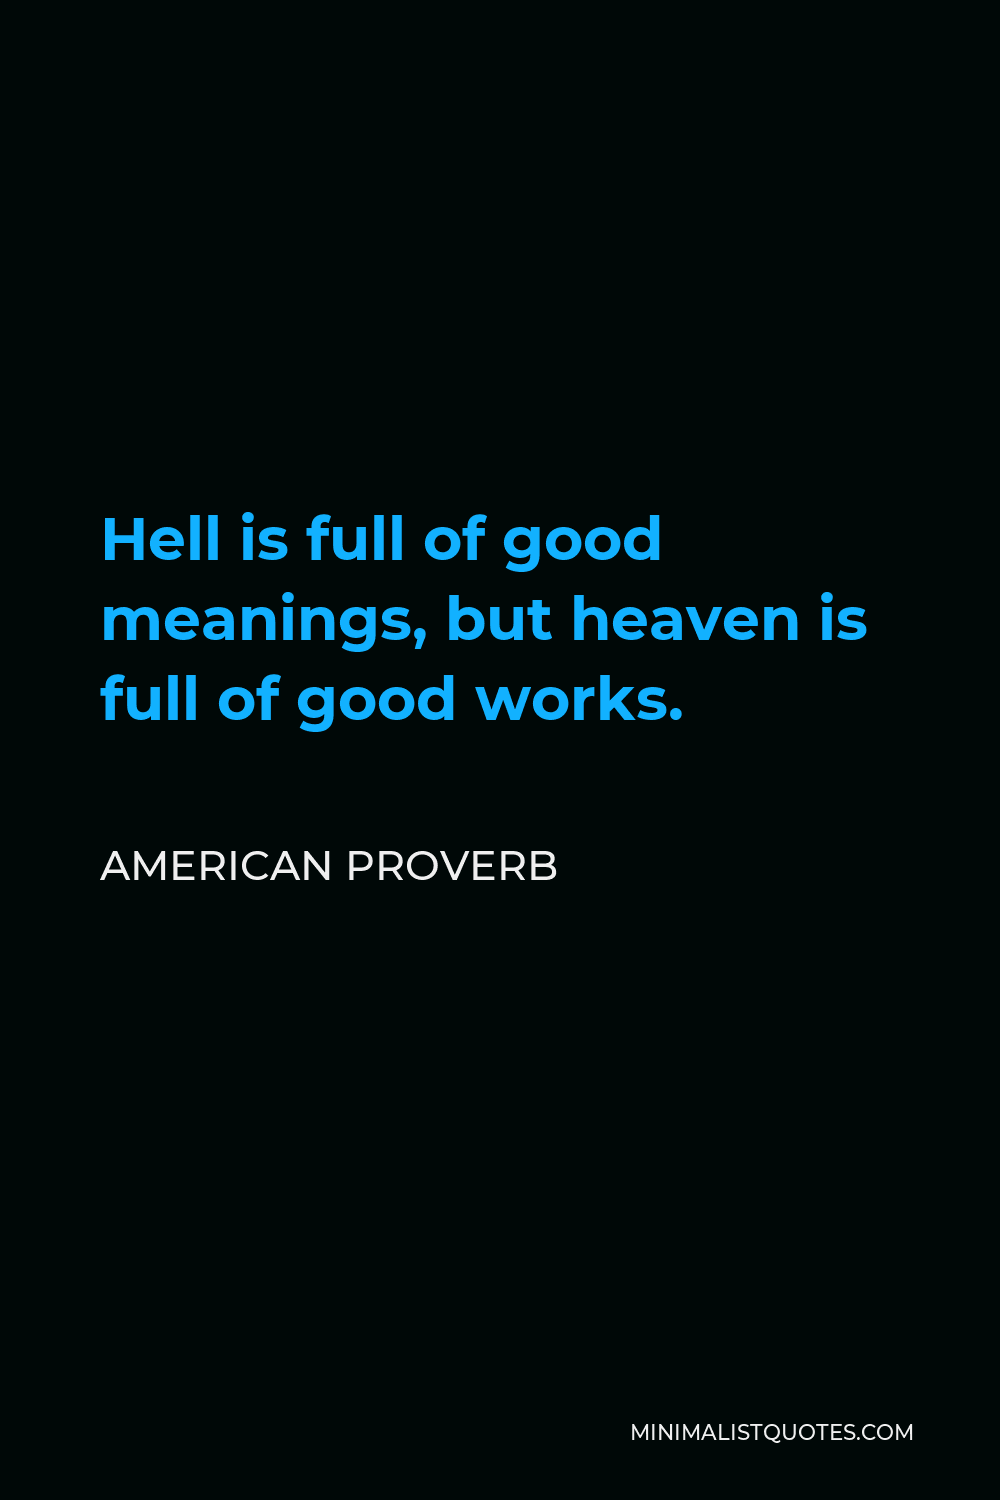 American Proverb Quote - Hell is full of good meanings, but heaven is full of good works.